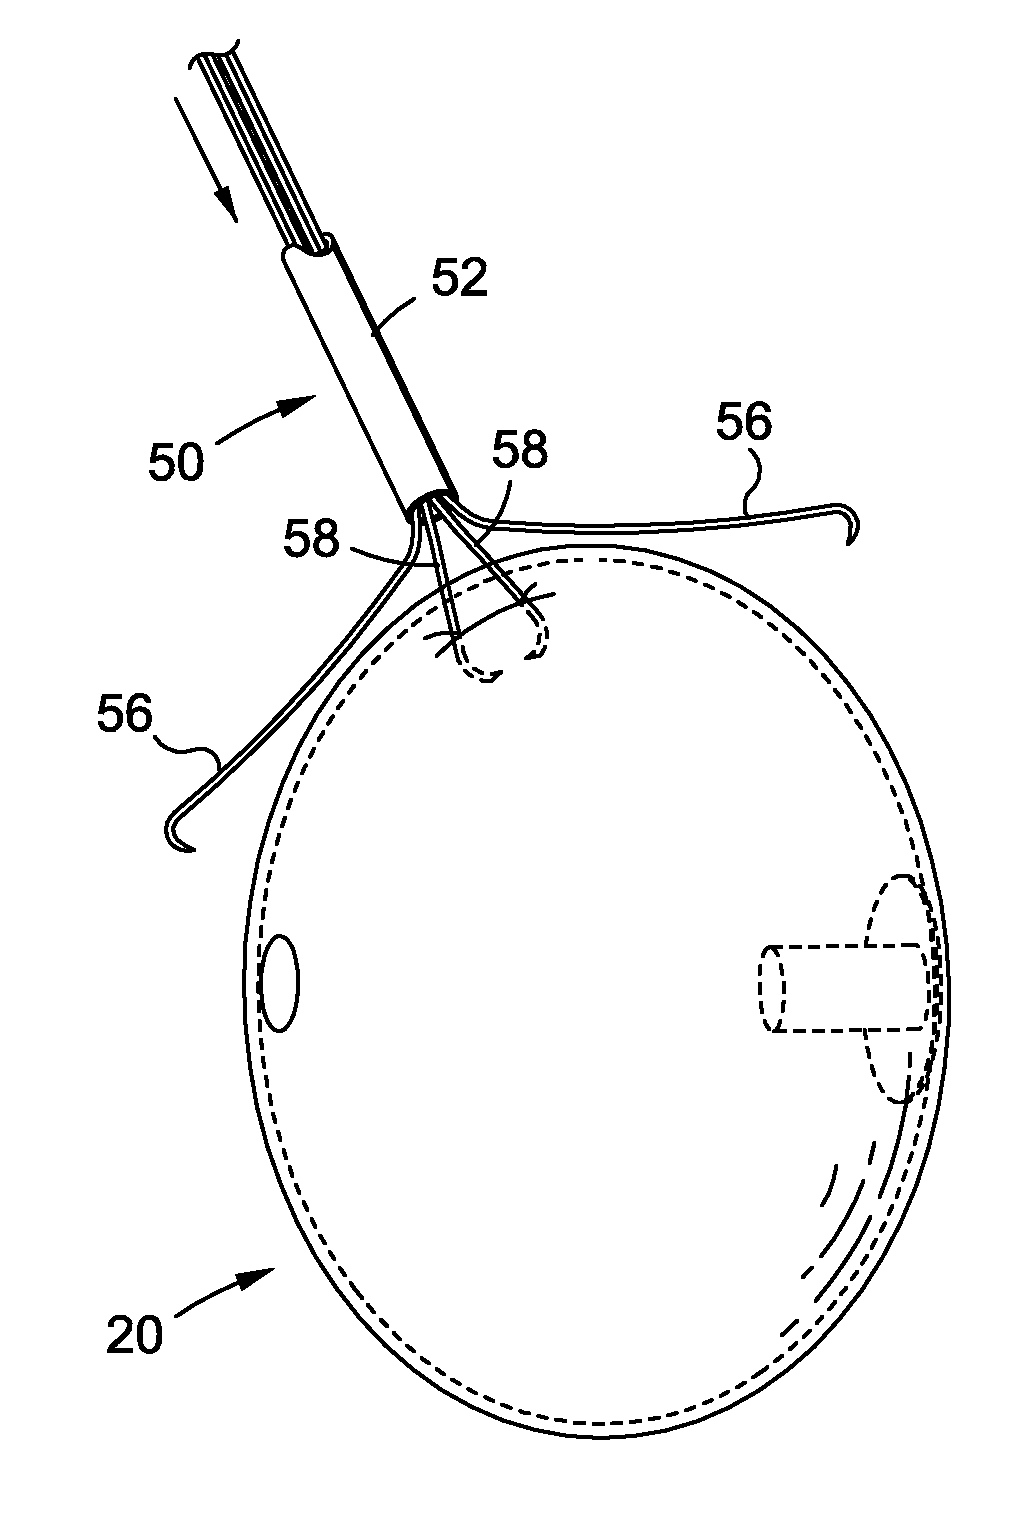 Endoscopic Tools for the Removal of Balloon-Like Intragastric Devices